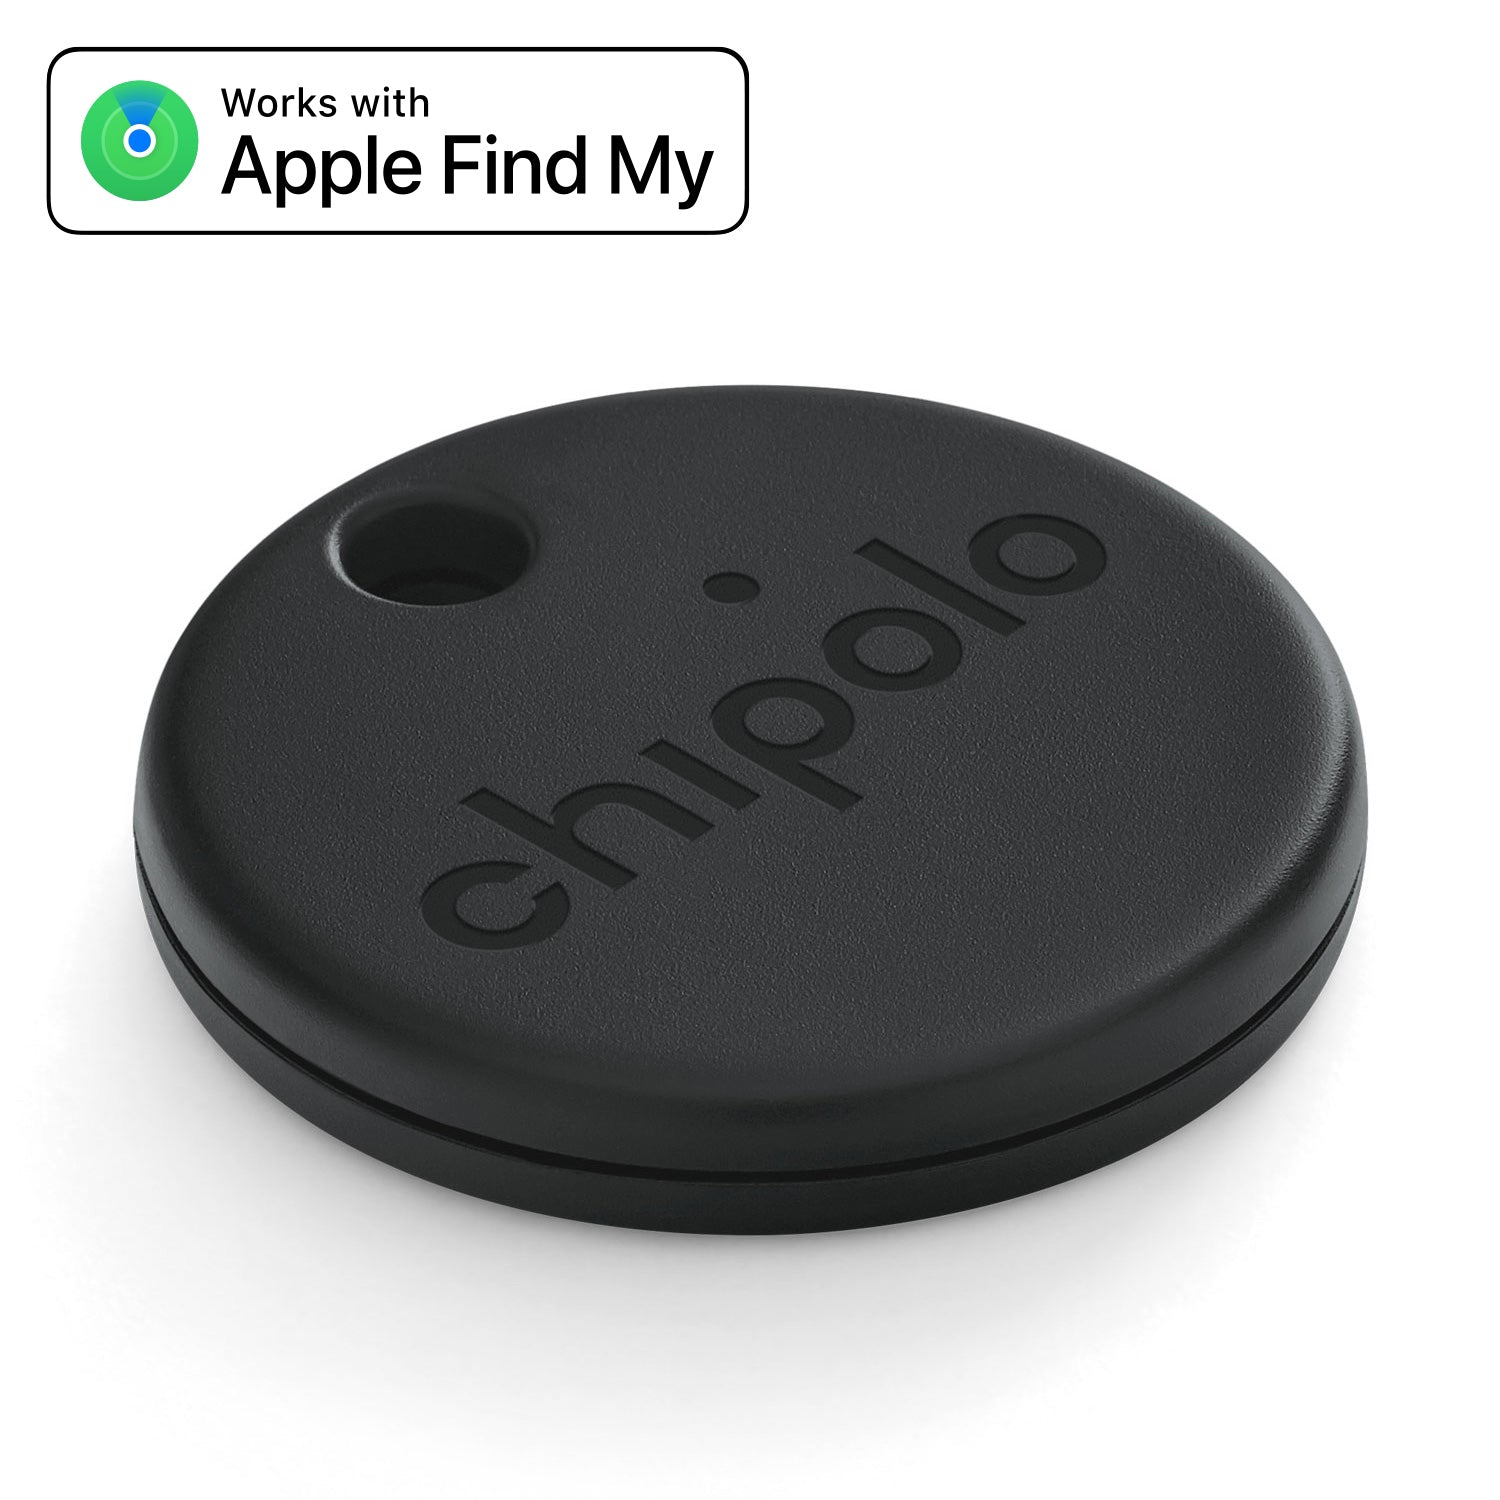 Chipolo one spot key tracker review: It's access to Apple's My